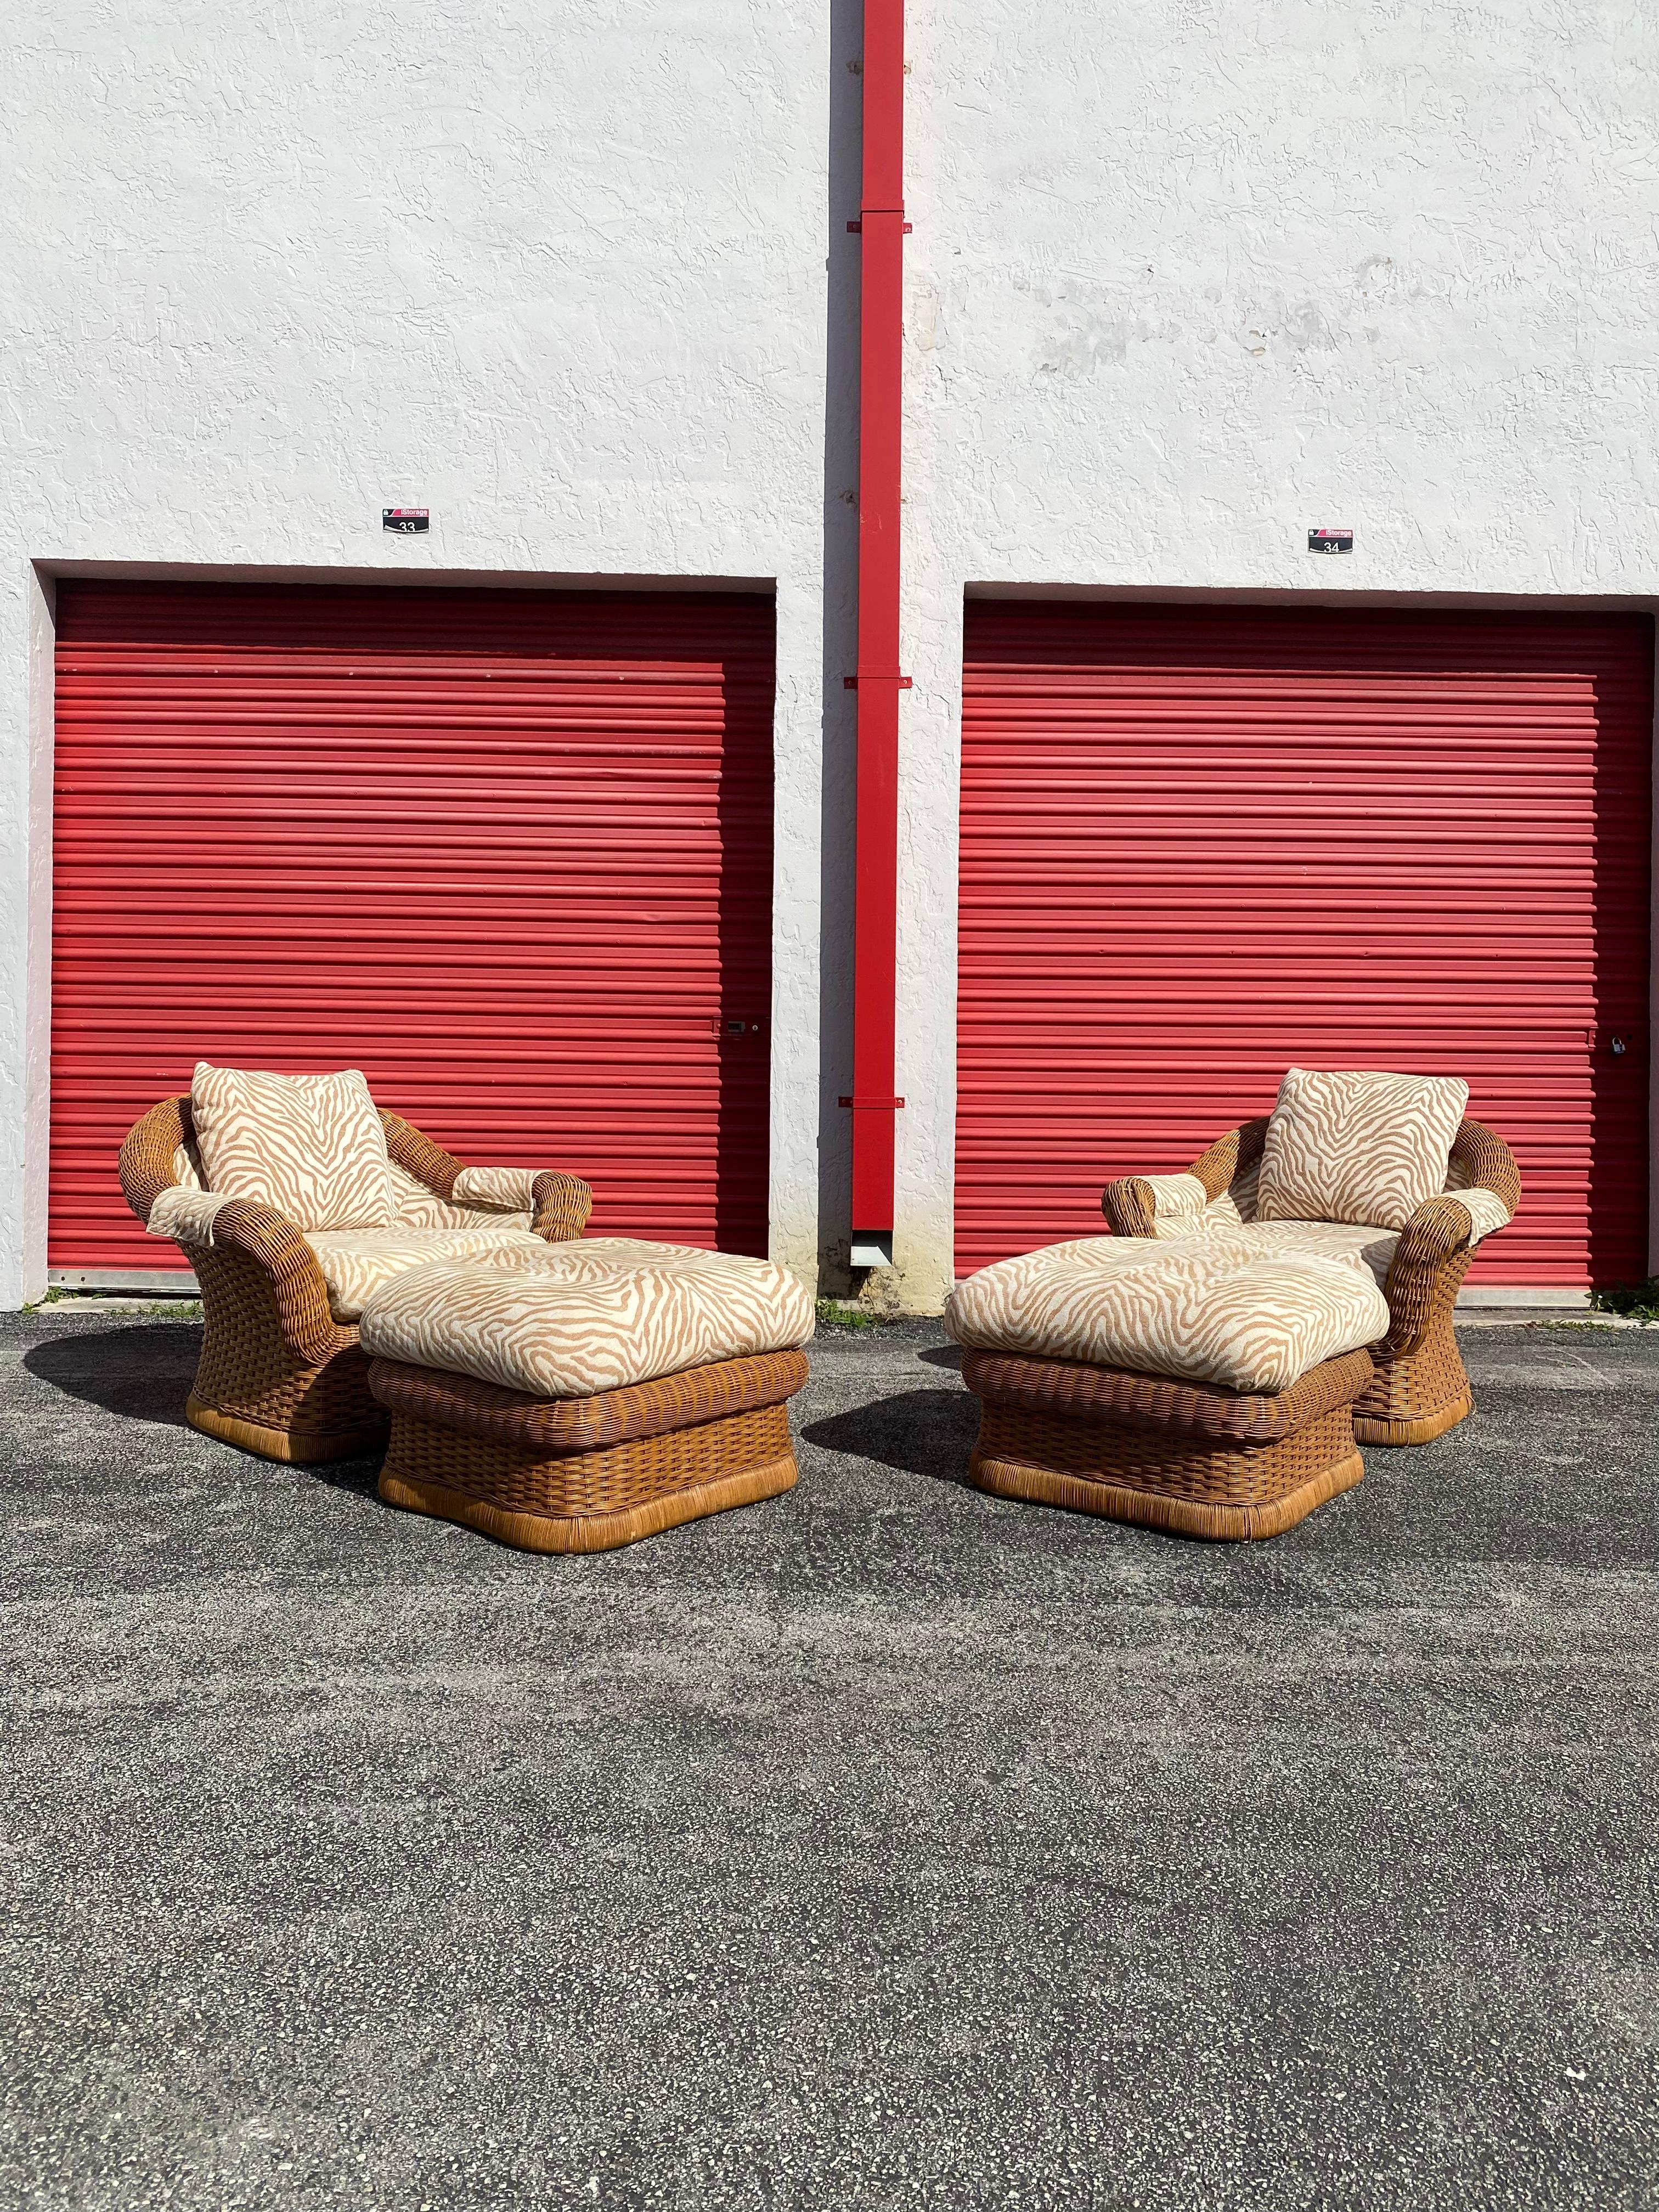 1970s Ficks Reed Woven Rattan Zebra Chairs and Ottomans, Set of 4 For Sale 1